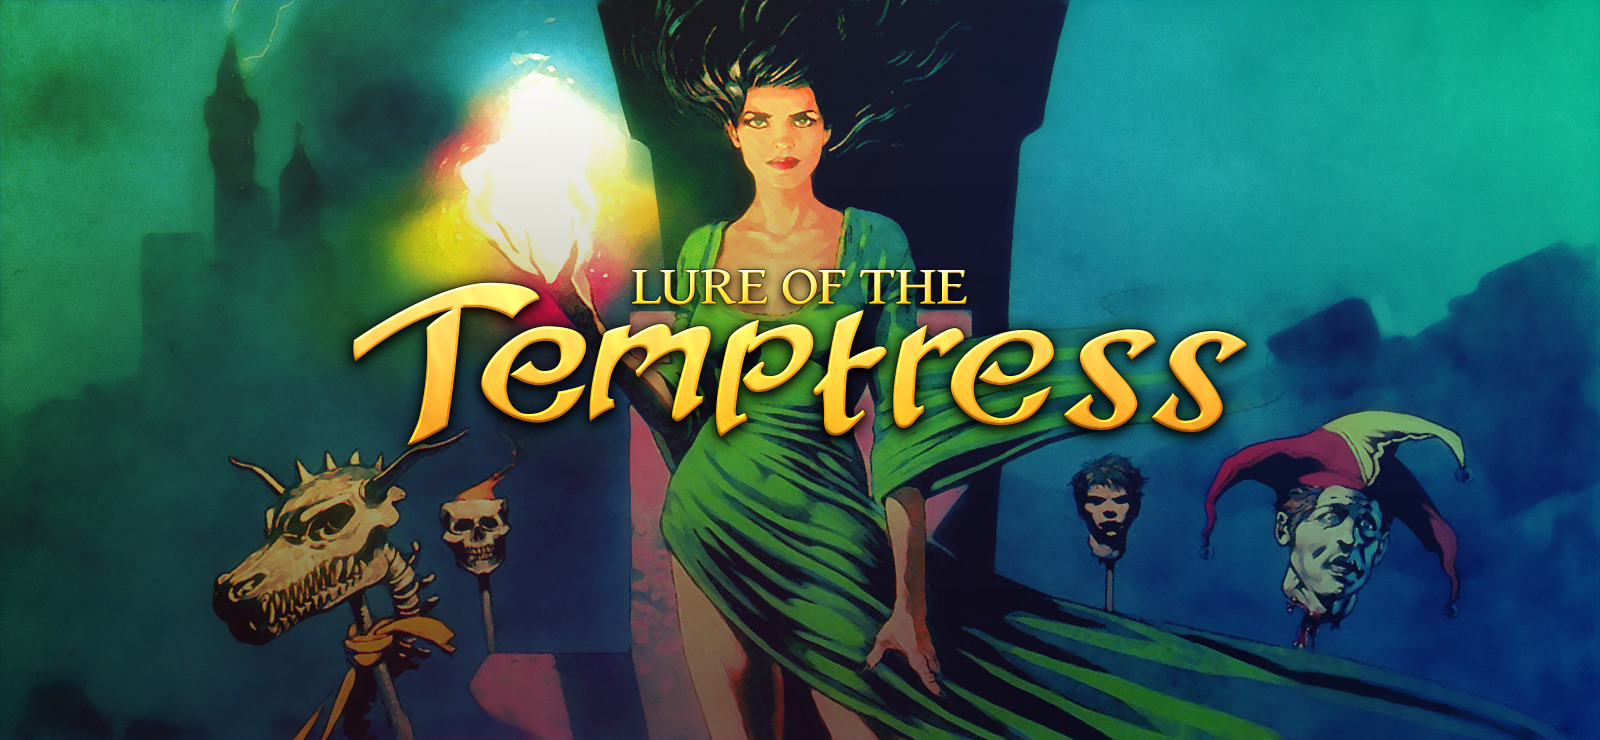 Lure of The Tempress